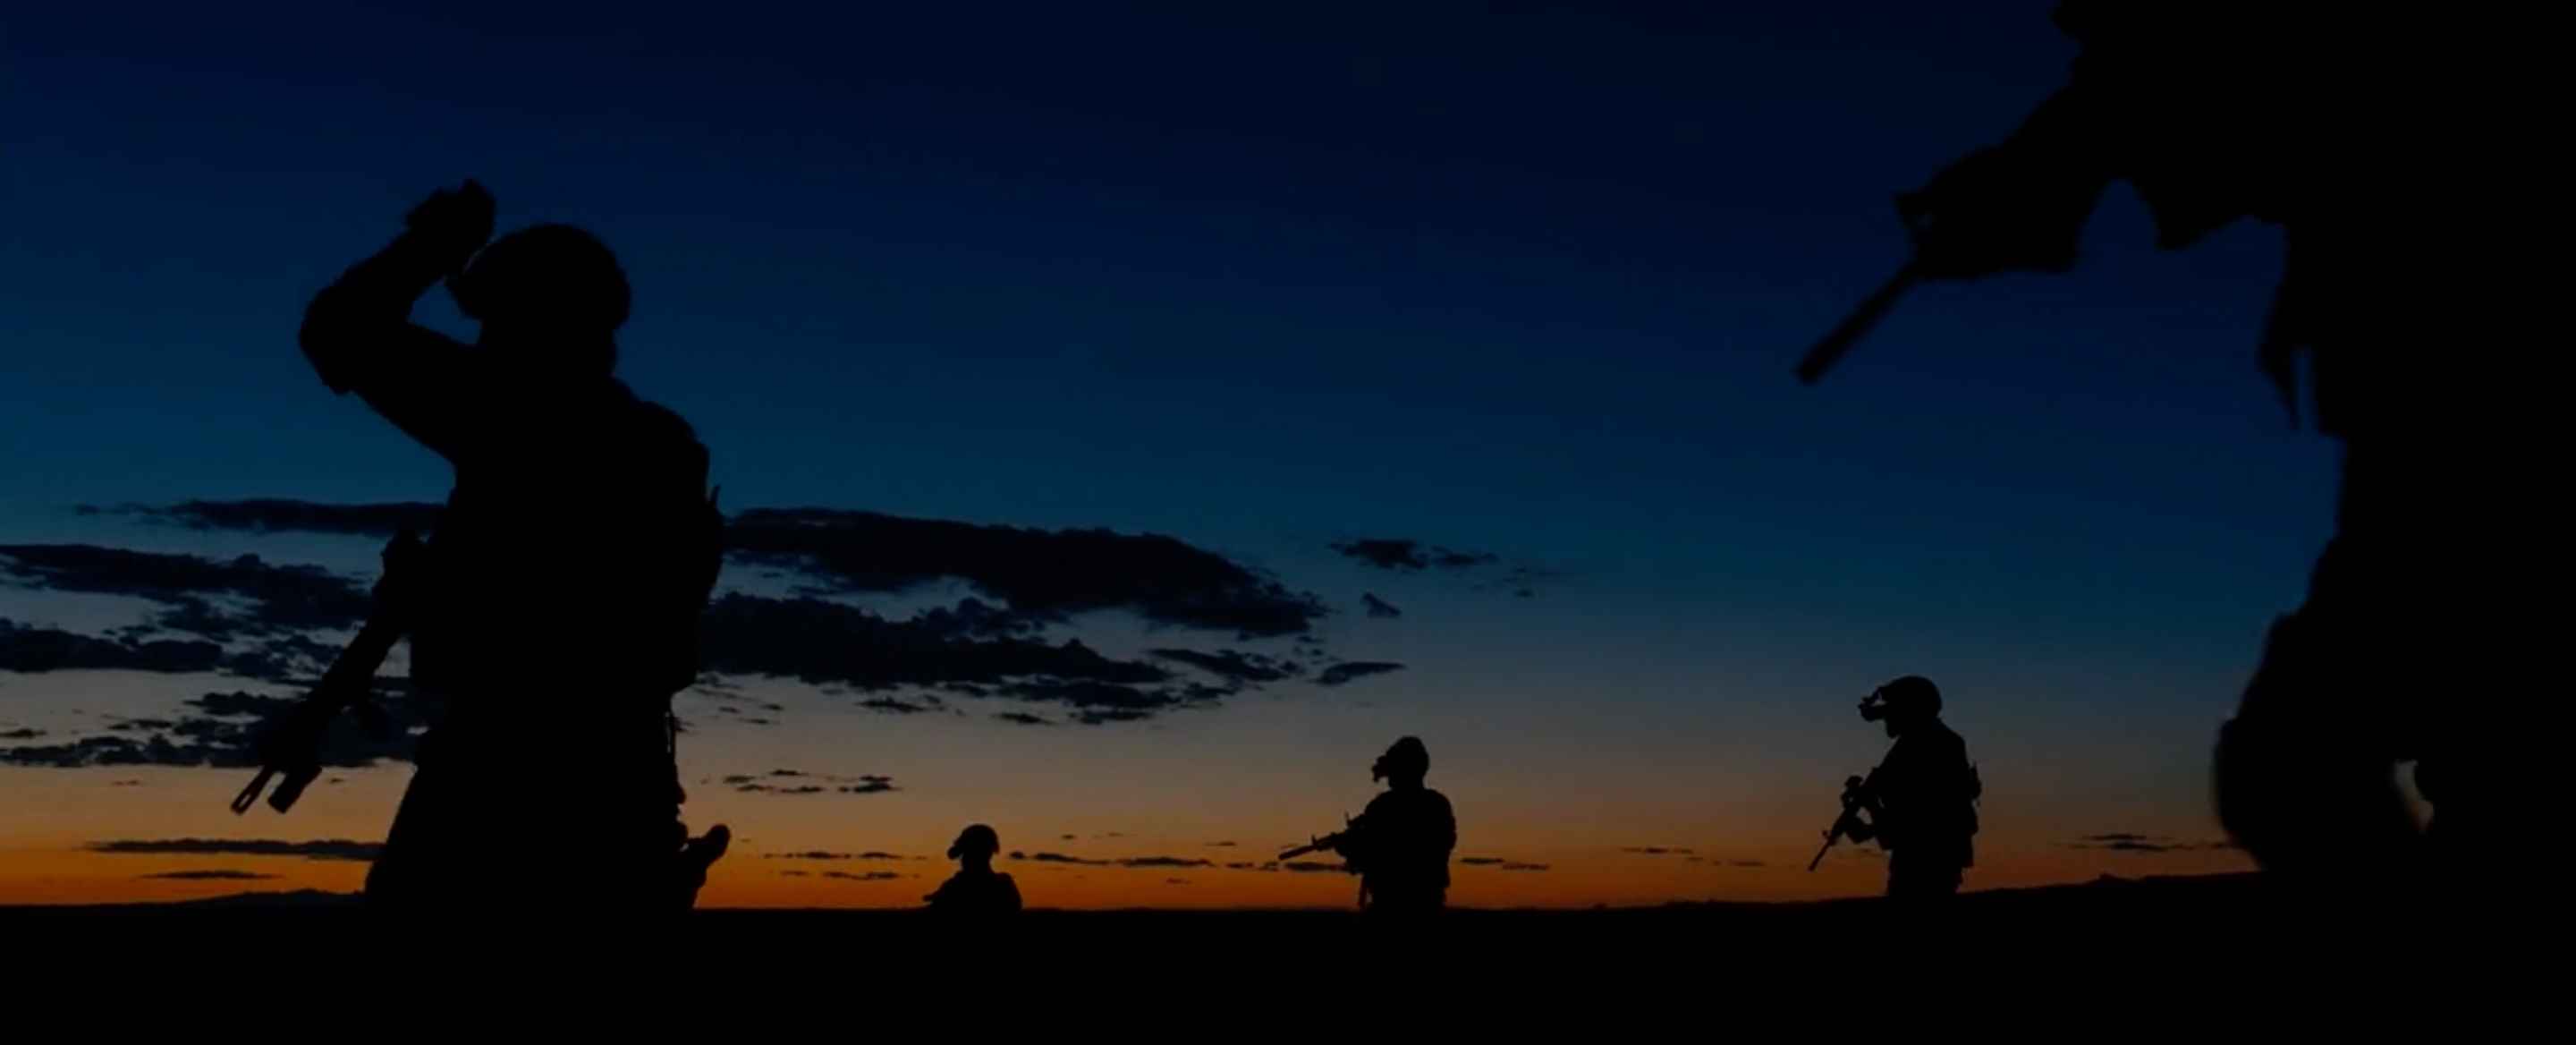 Sicario - Task move into positions with the sunset in the background